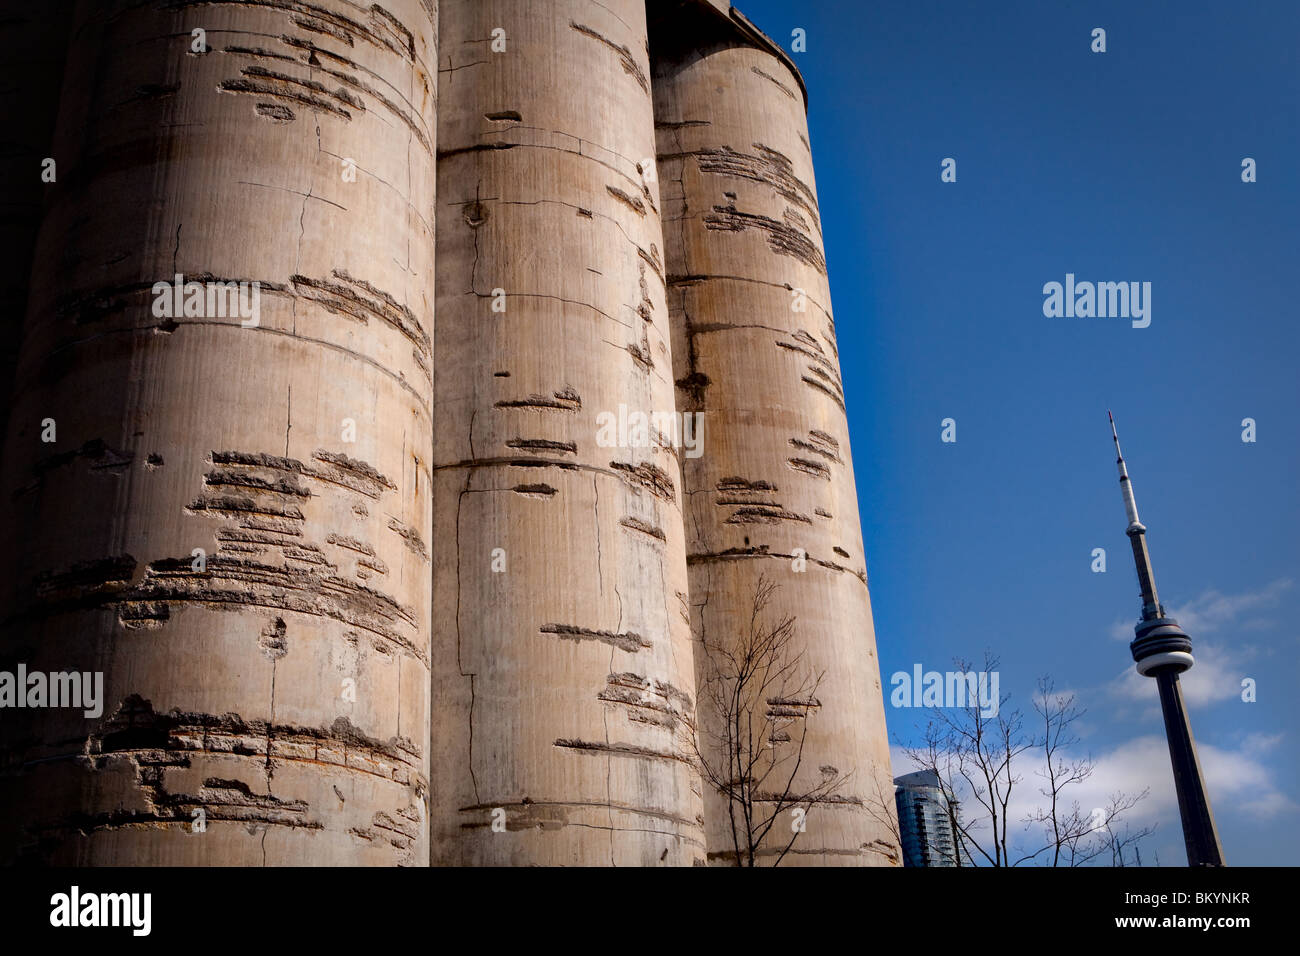 CN tower is seen behind the Canada Malting Co. grain processing tower in Toronto Stock Photo